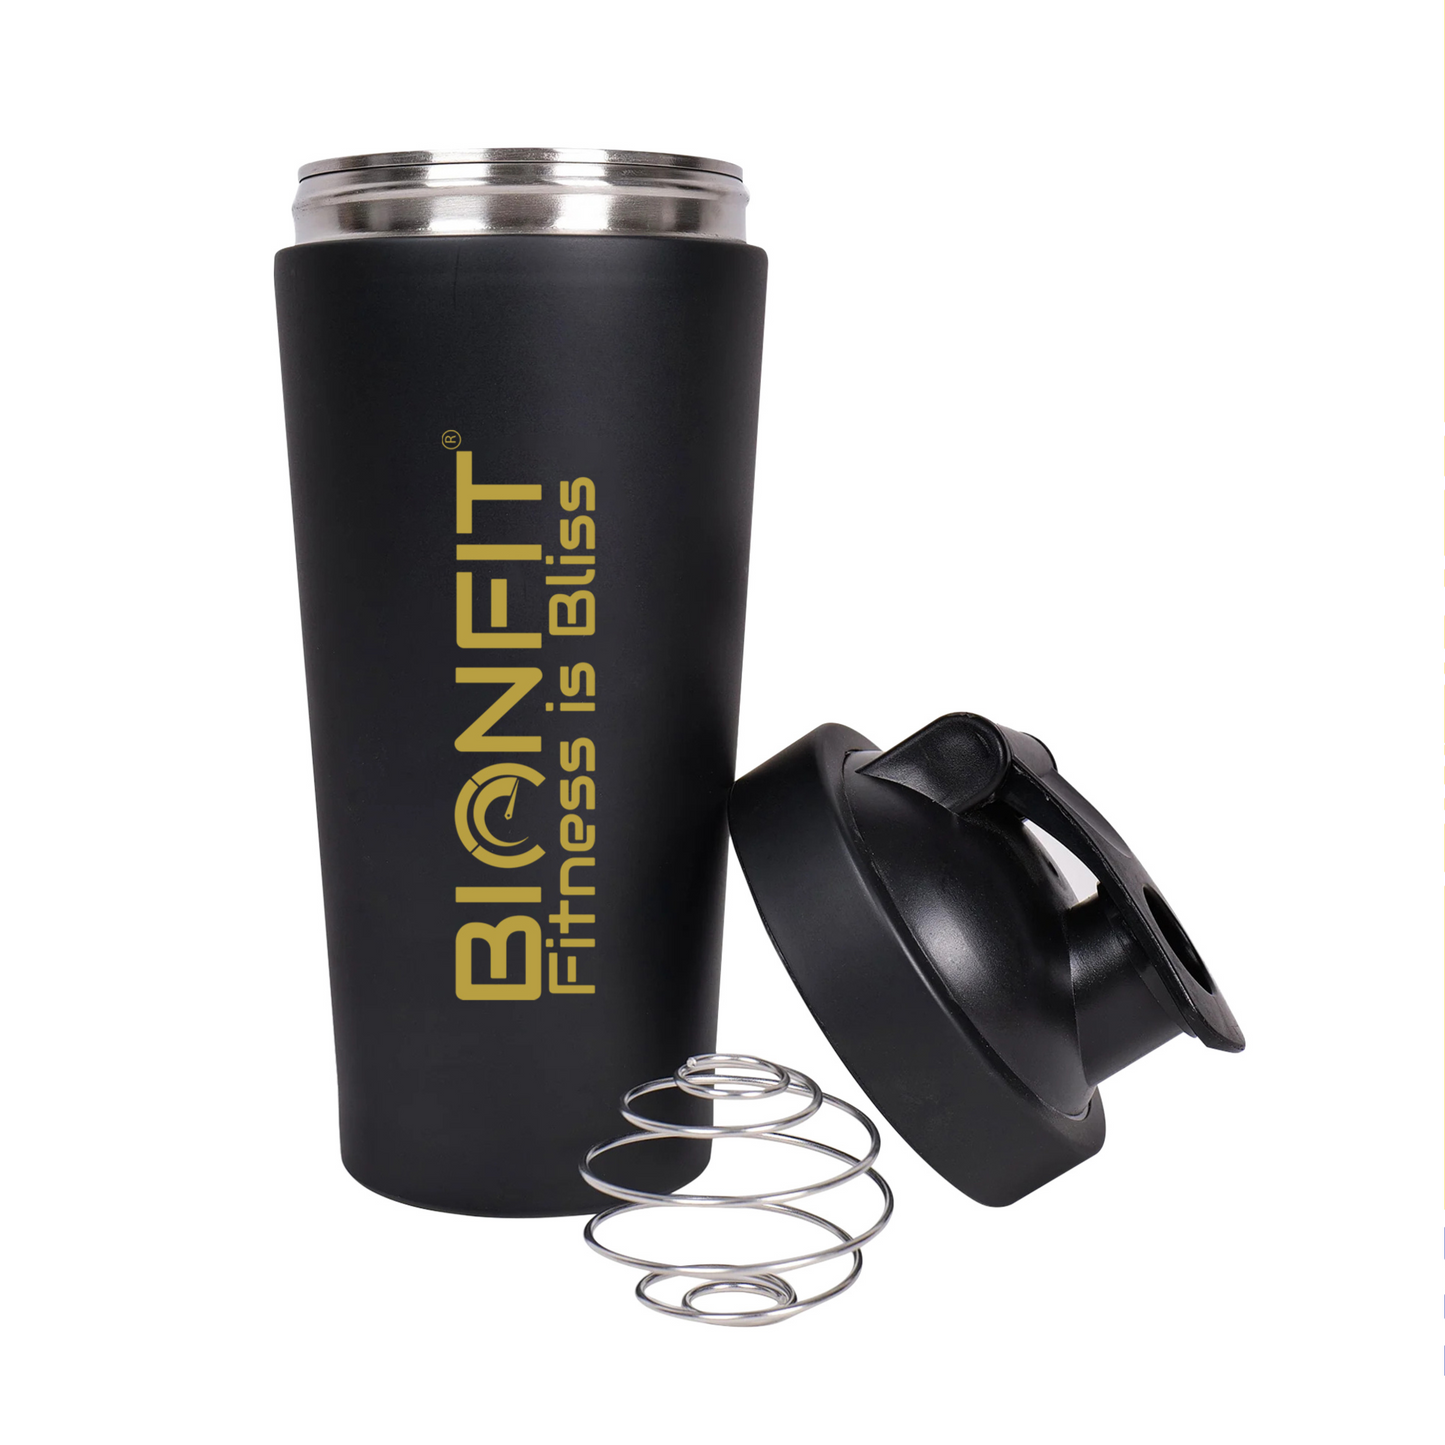 BIONFIT Stainless Steel Gym Shaker Bottle for Protein Shake, Sports and Hiking Bottle 700 ml Shaker